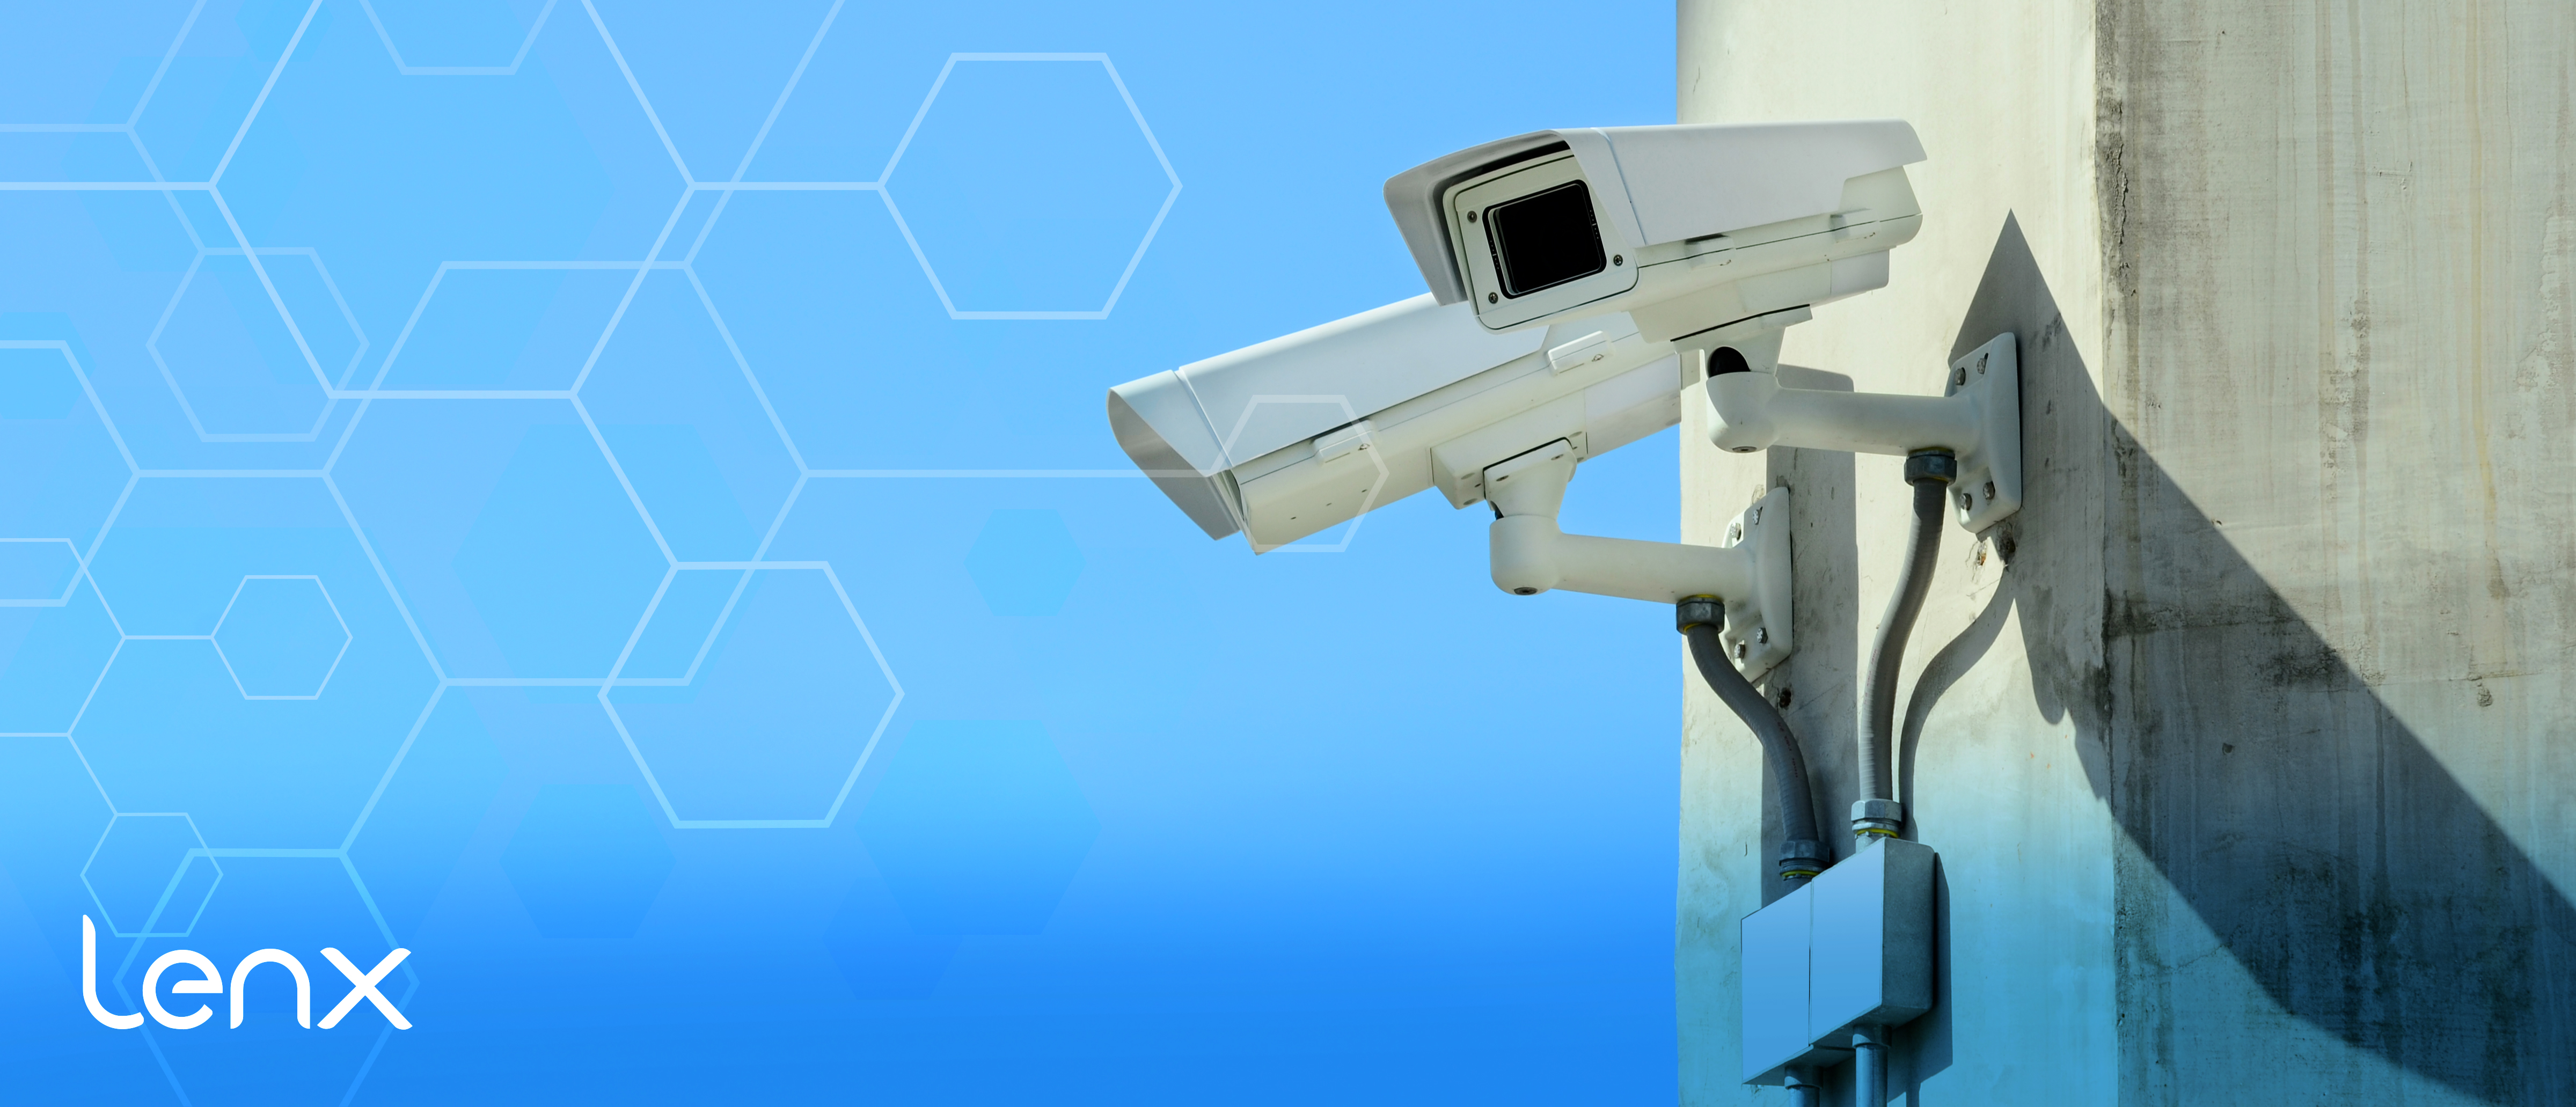 Understanding The Limitations Of AI Security, Active Shooter Detection Systems